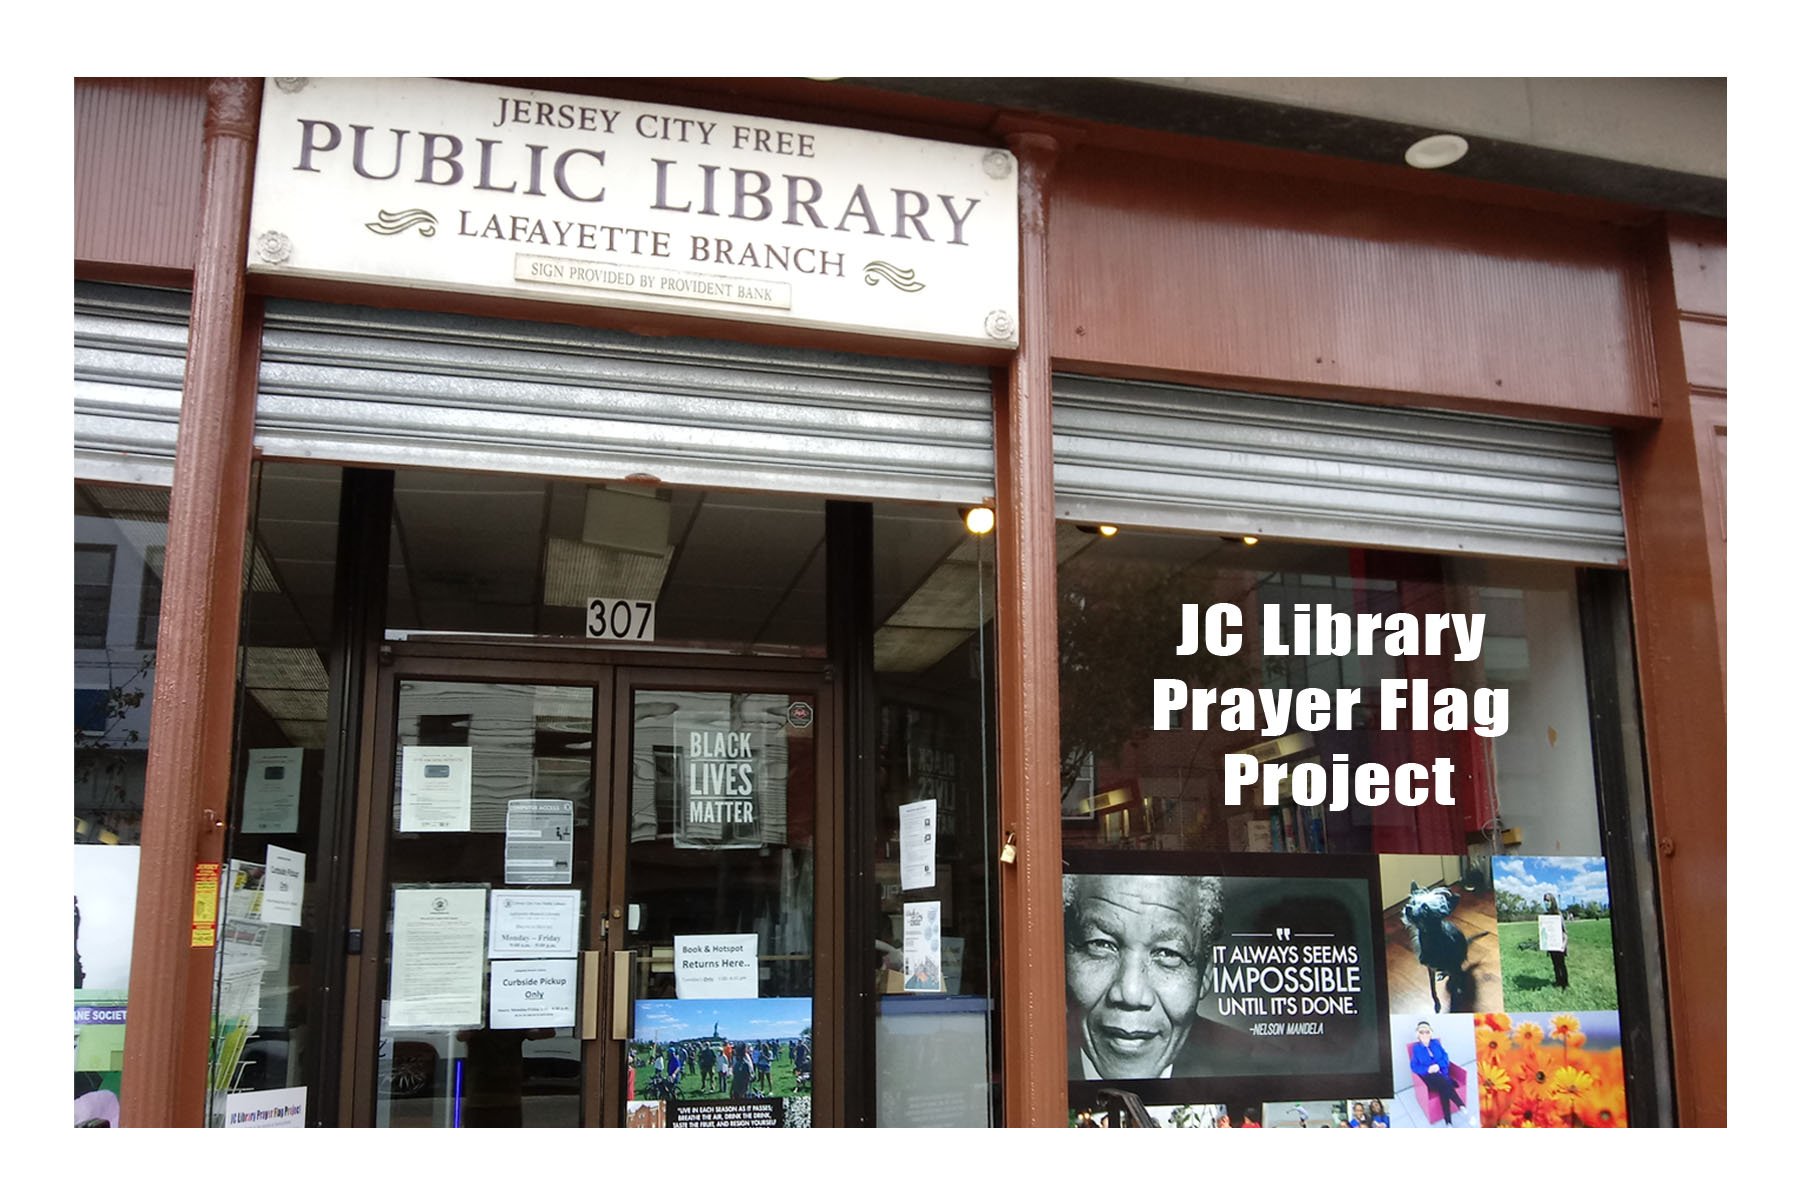 JC Library Prayer Flags Project